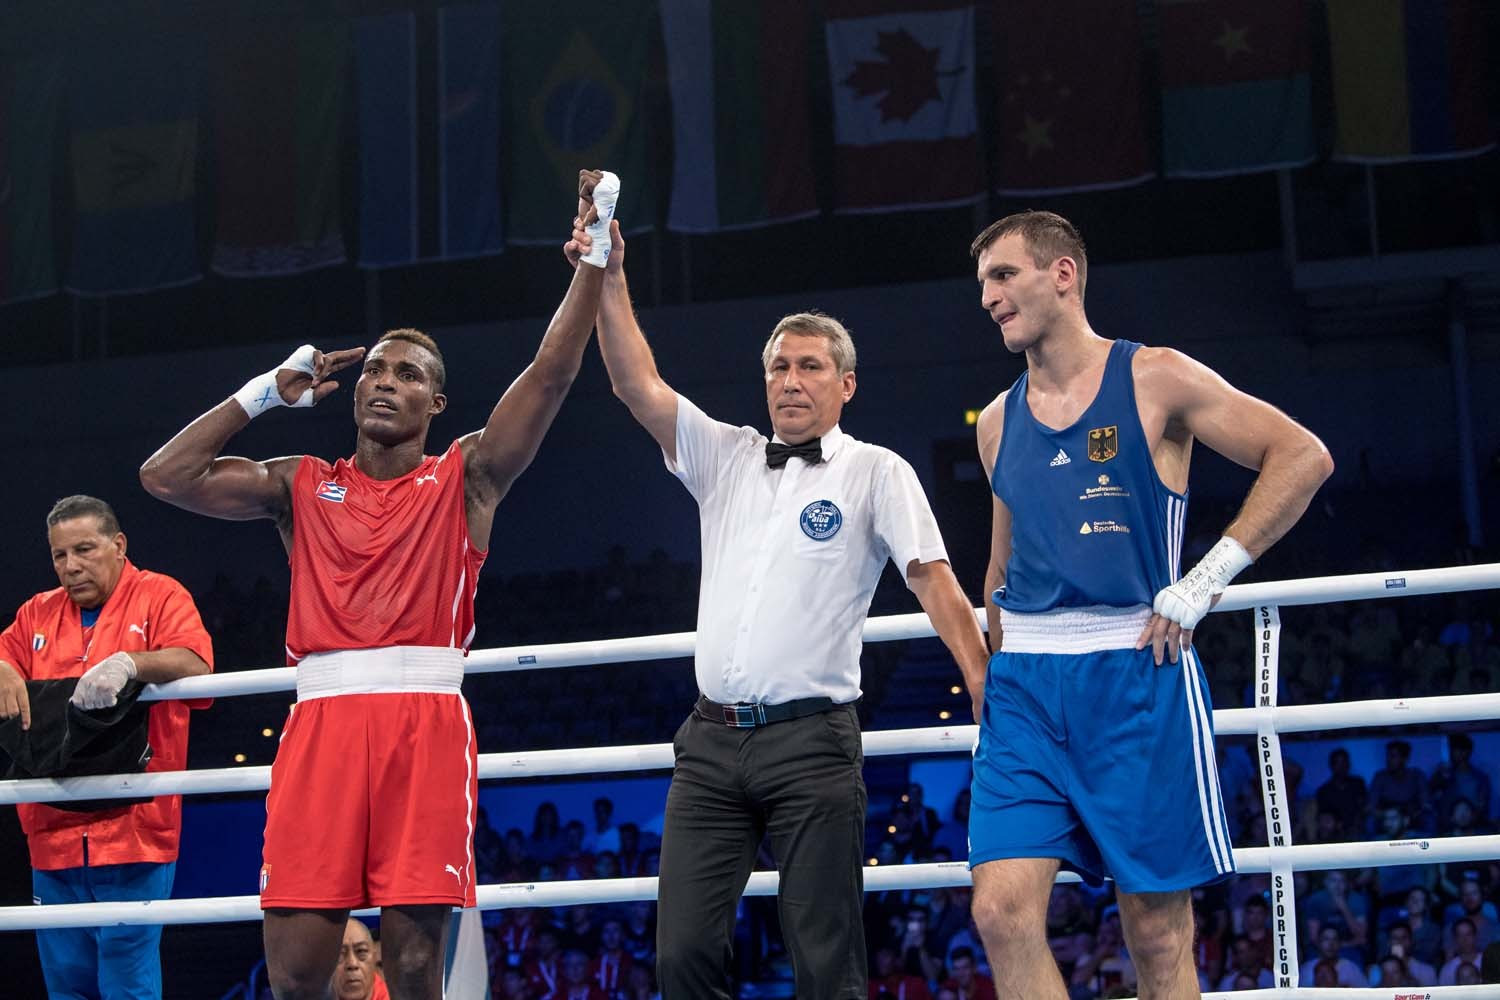 Compatriot Julio César La Cruz remains on course for a fourth-consecutive world light heavyweight title thanks to a unanimous points victory over Germany's Ibragim Bazuev ©AIBA